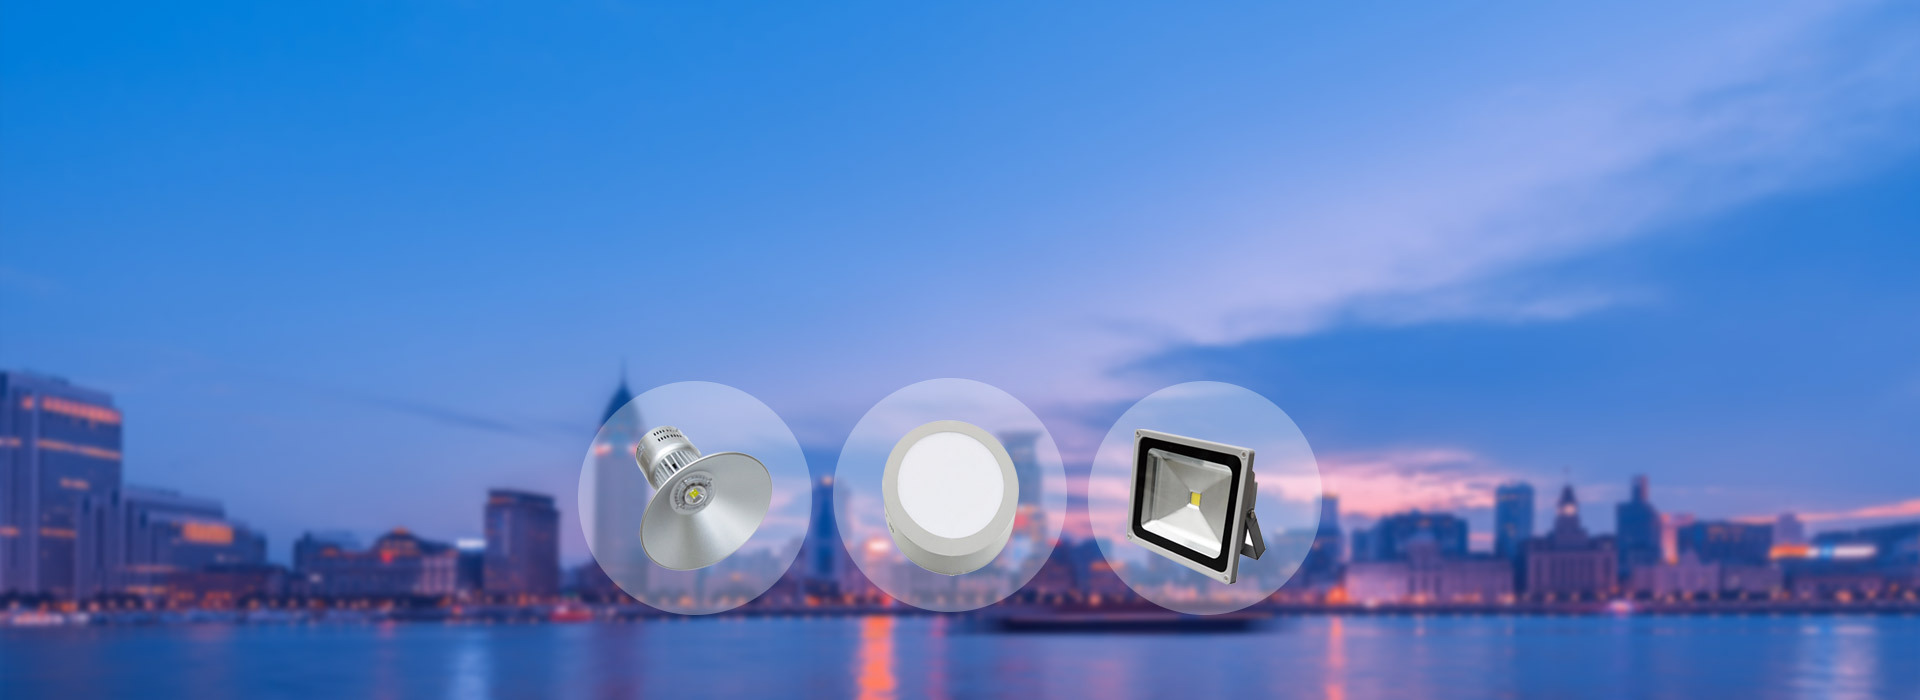 Electrical Accessories and LED Lights